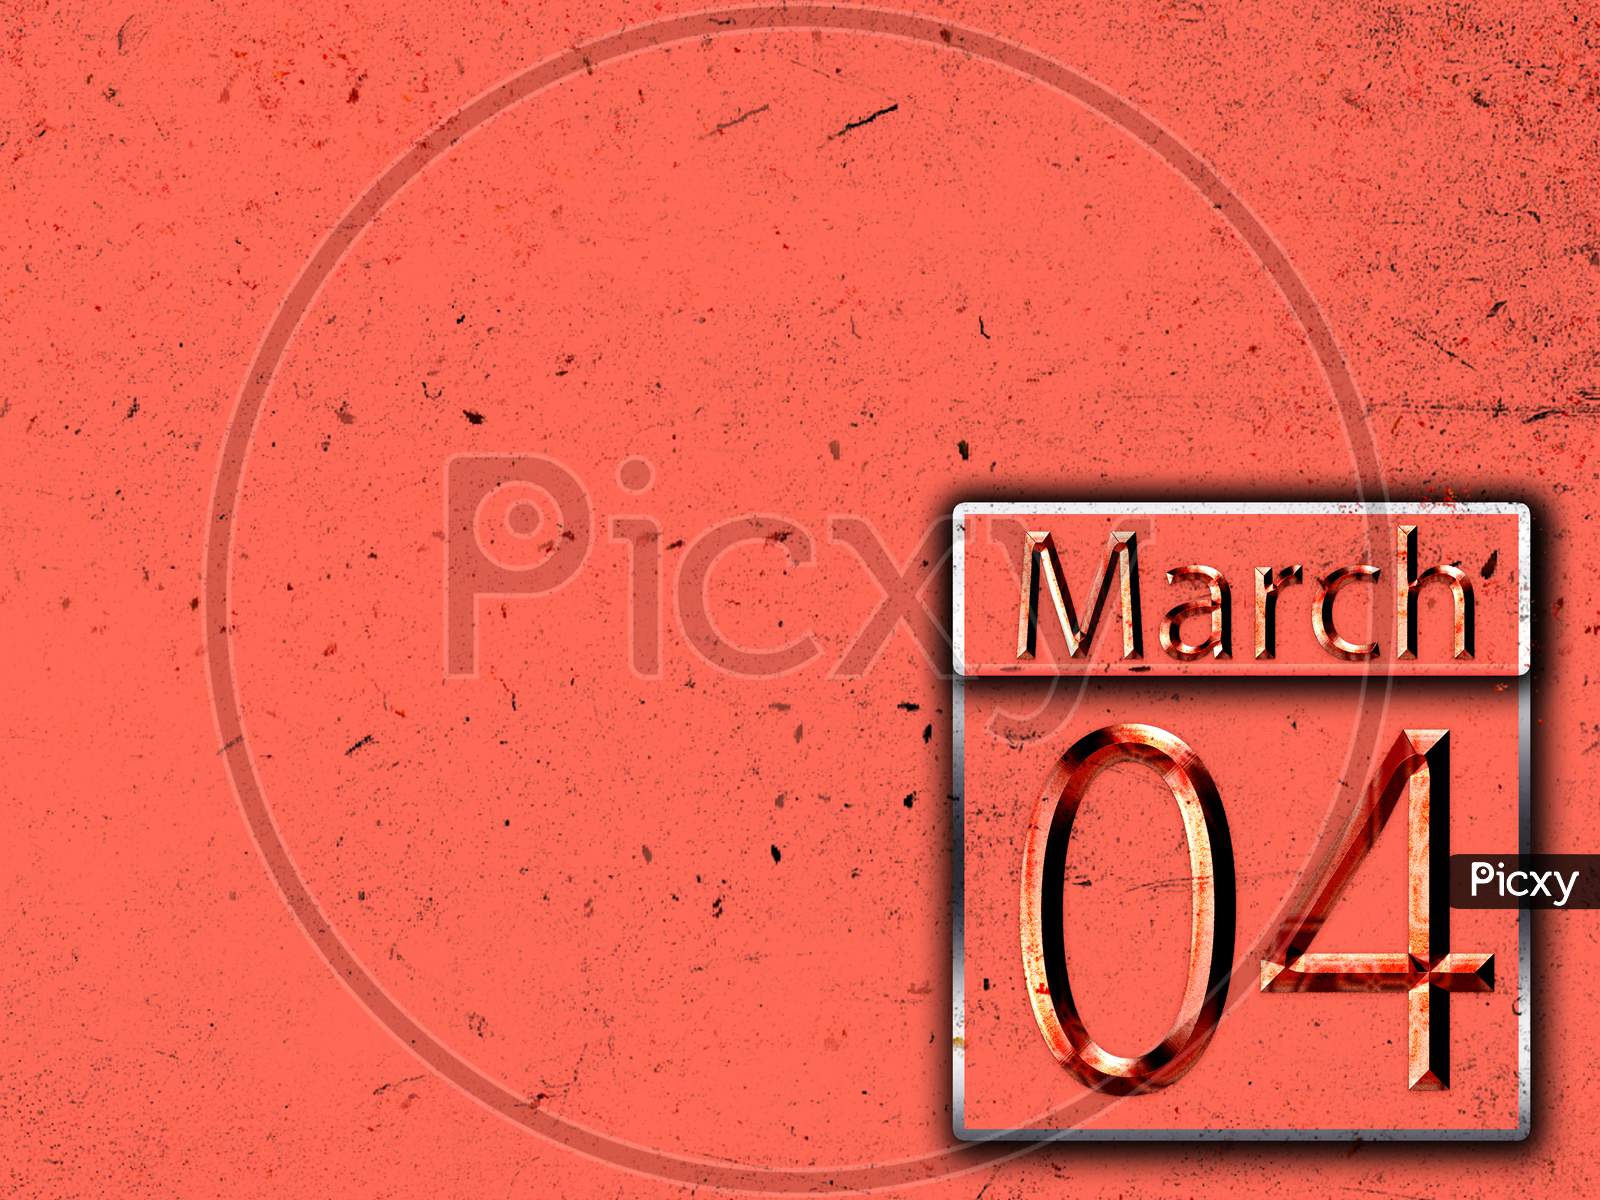 04 March, Monthly Calendar On Backgrand